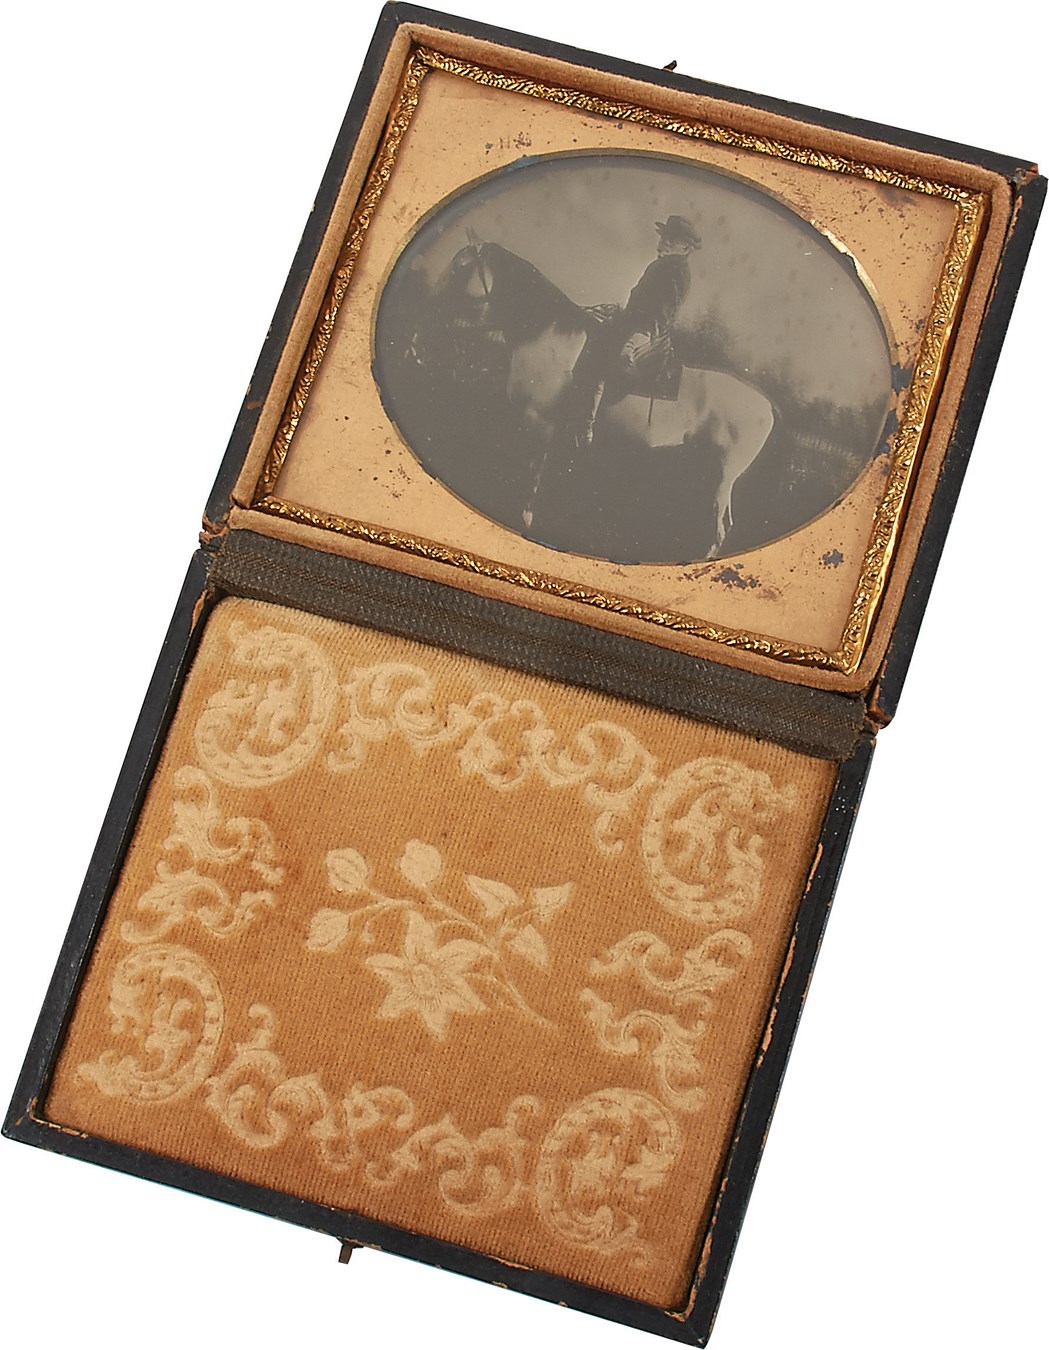 Pop Culture Autographs - Important 1860s Confederate General Robert E. Lee on Traveller Ambrotype in Original Leather Case